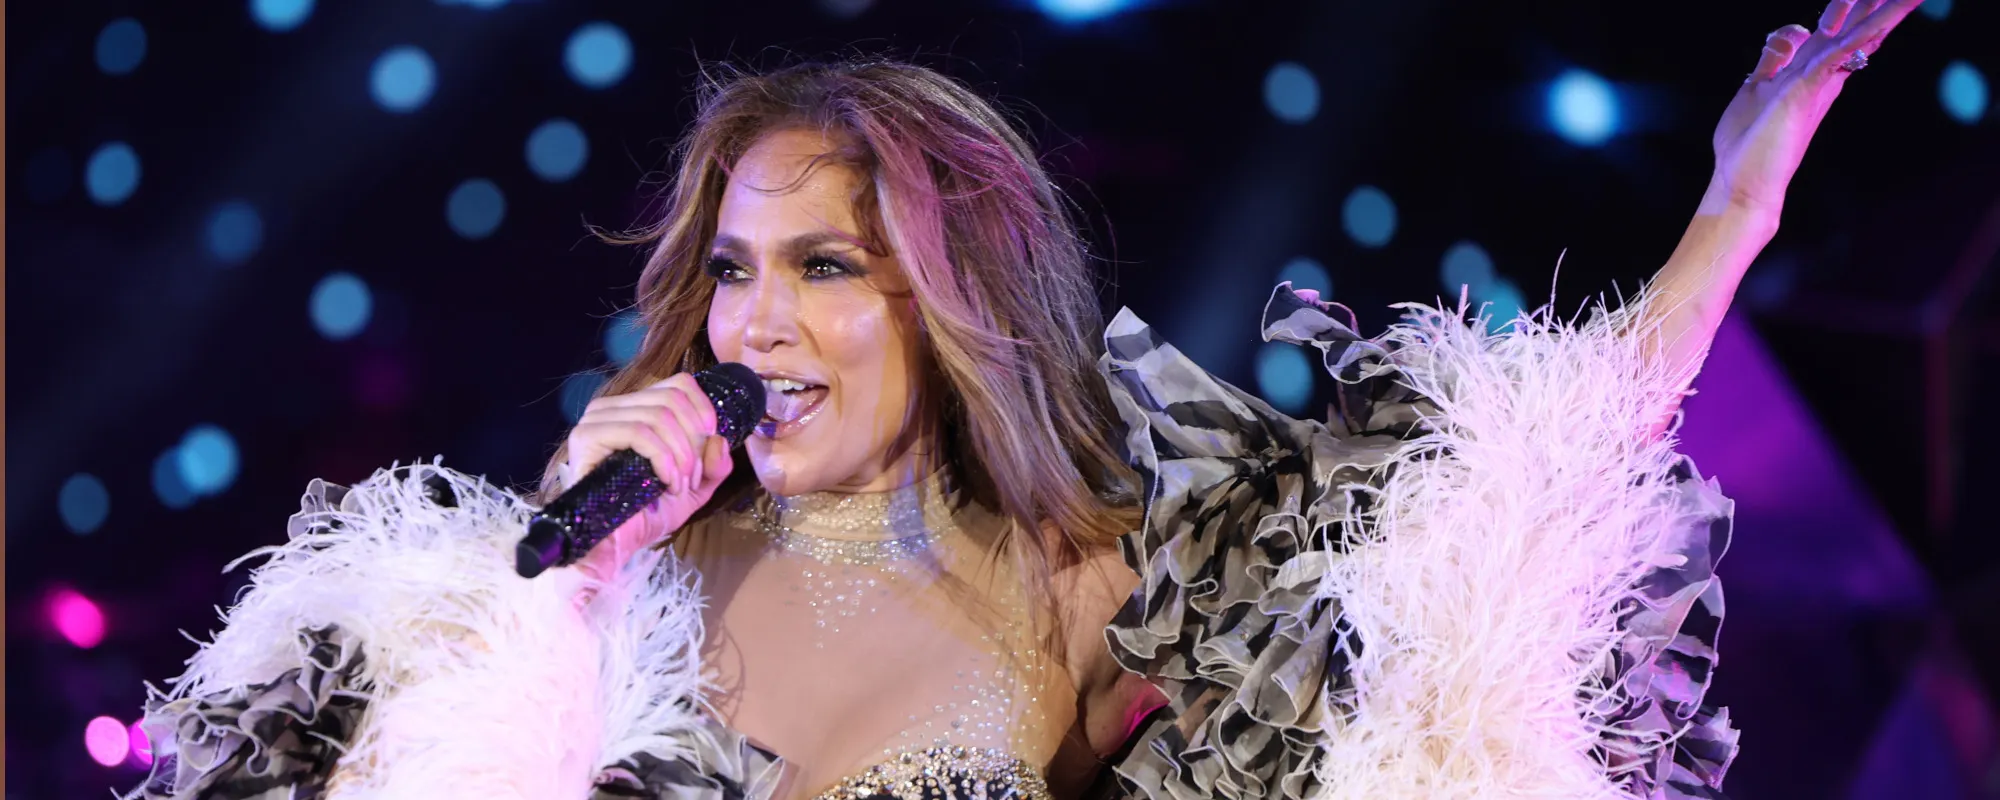 Jennifer Lopez’s First New Album in Nine Years, ‘This Is Me…Now,’ Due Soon